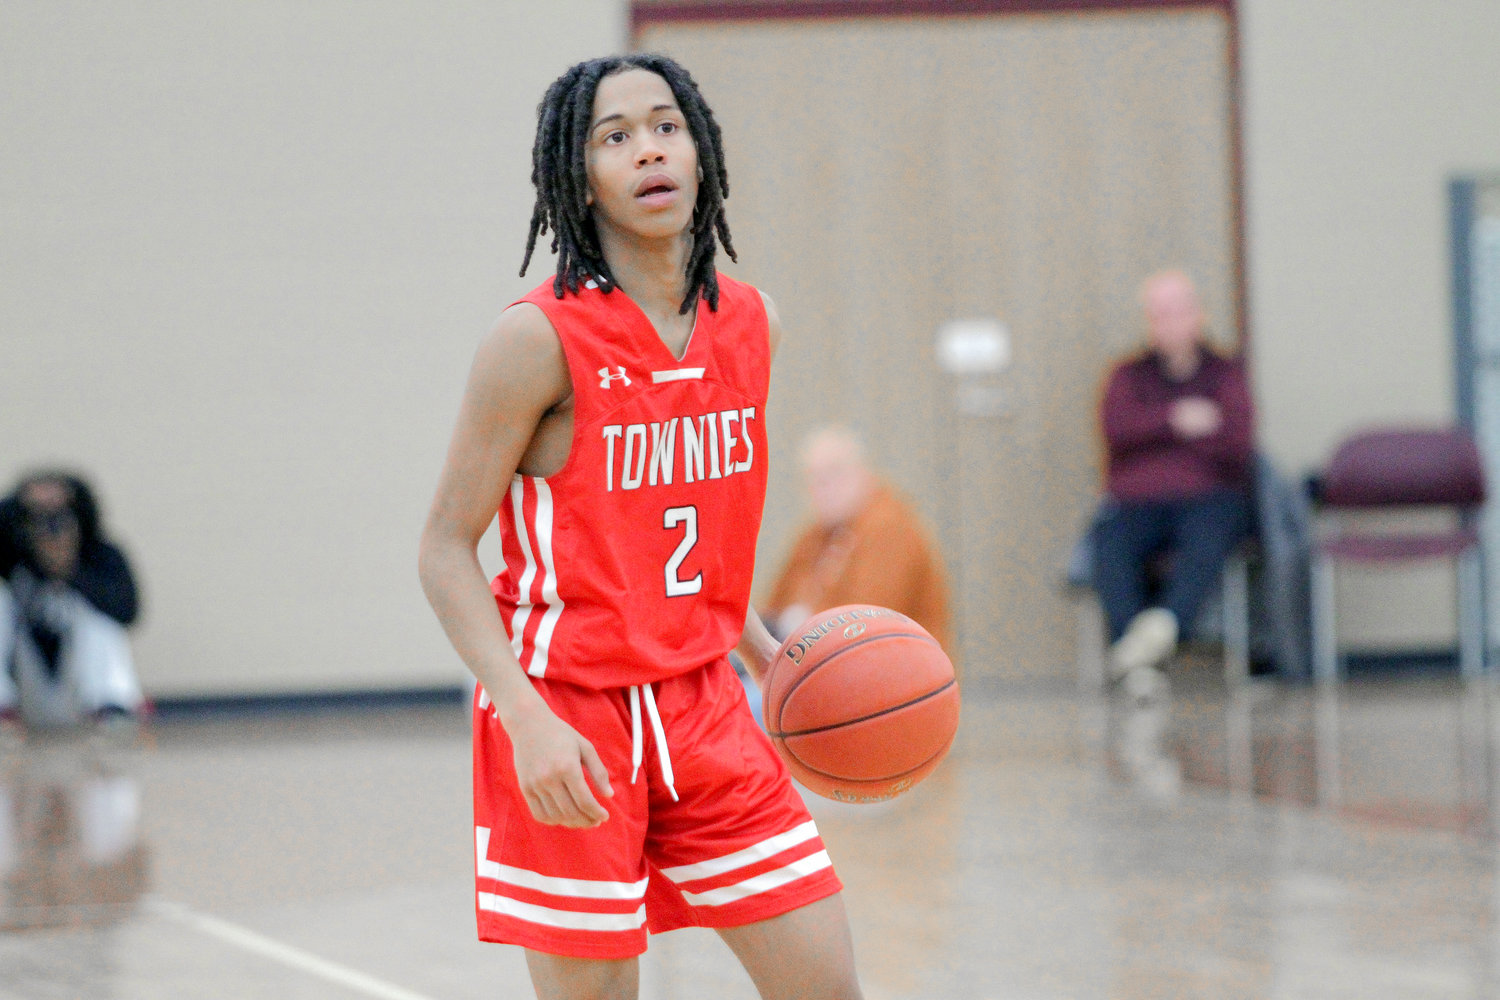 The EPHS boys' basketball team will need the likes of senior guard Max Collins to be at his best if the Townies hope to advance deep into the 2023 Open State Championship Tournament.